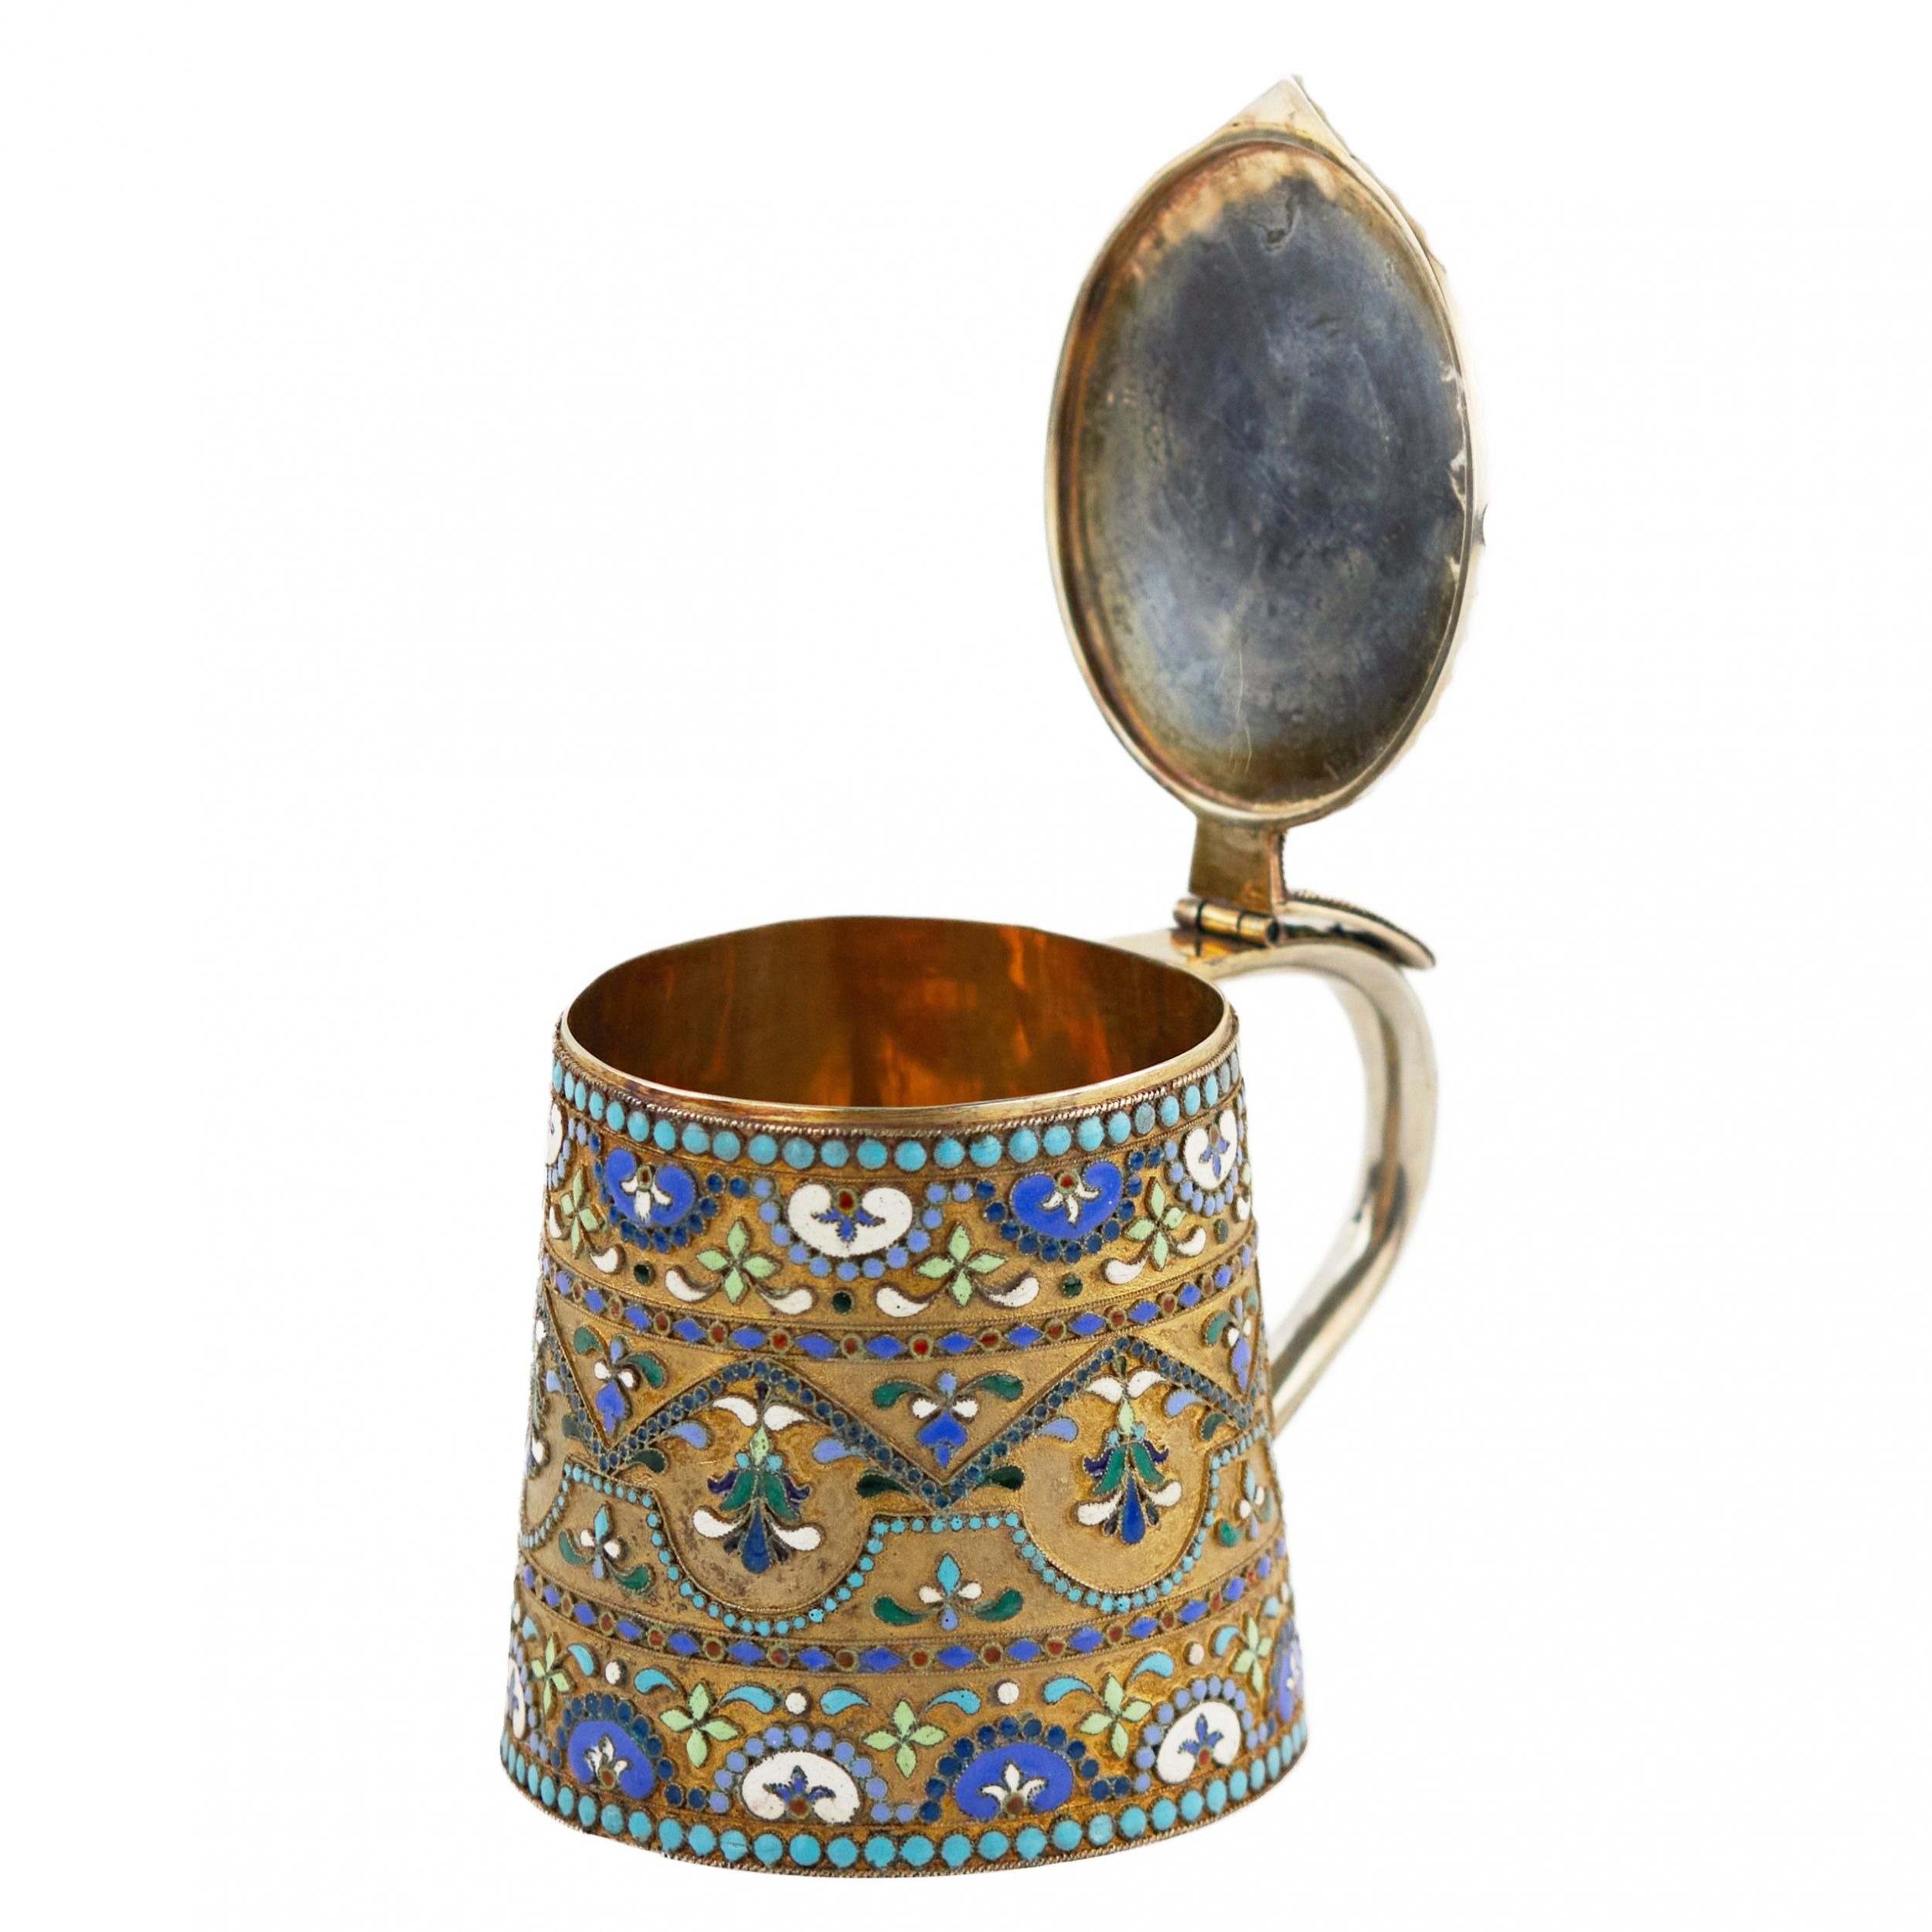 Russian, silver cloisonne enamel mug in neo-Russian style. 20th century. - Image 5 of 8